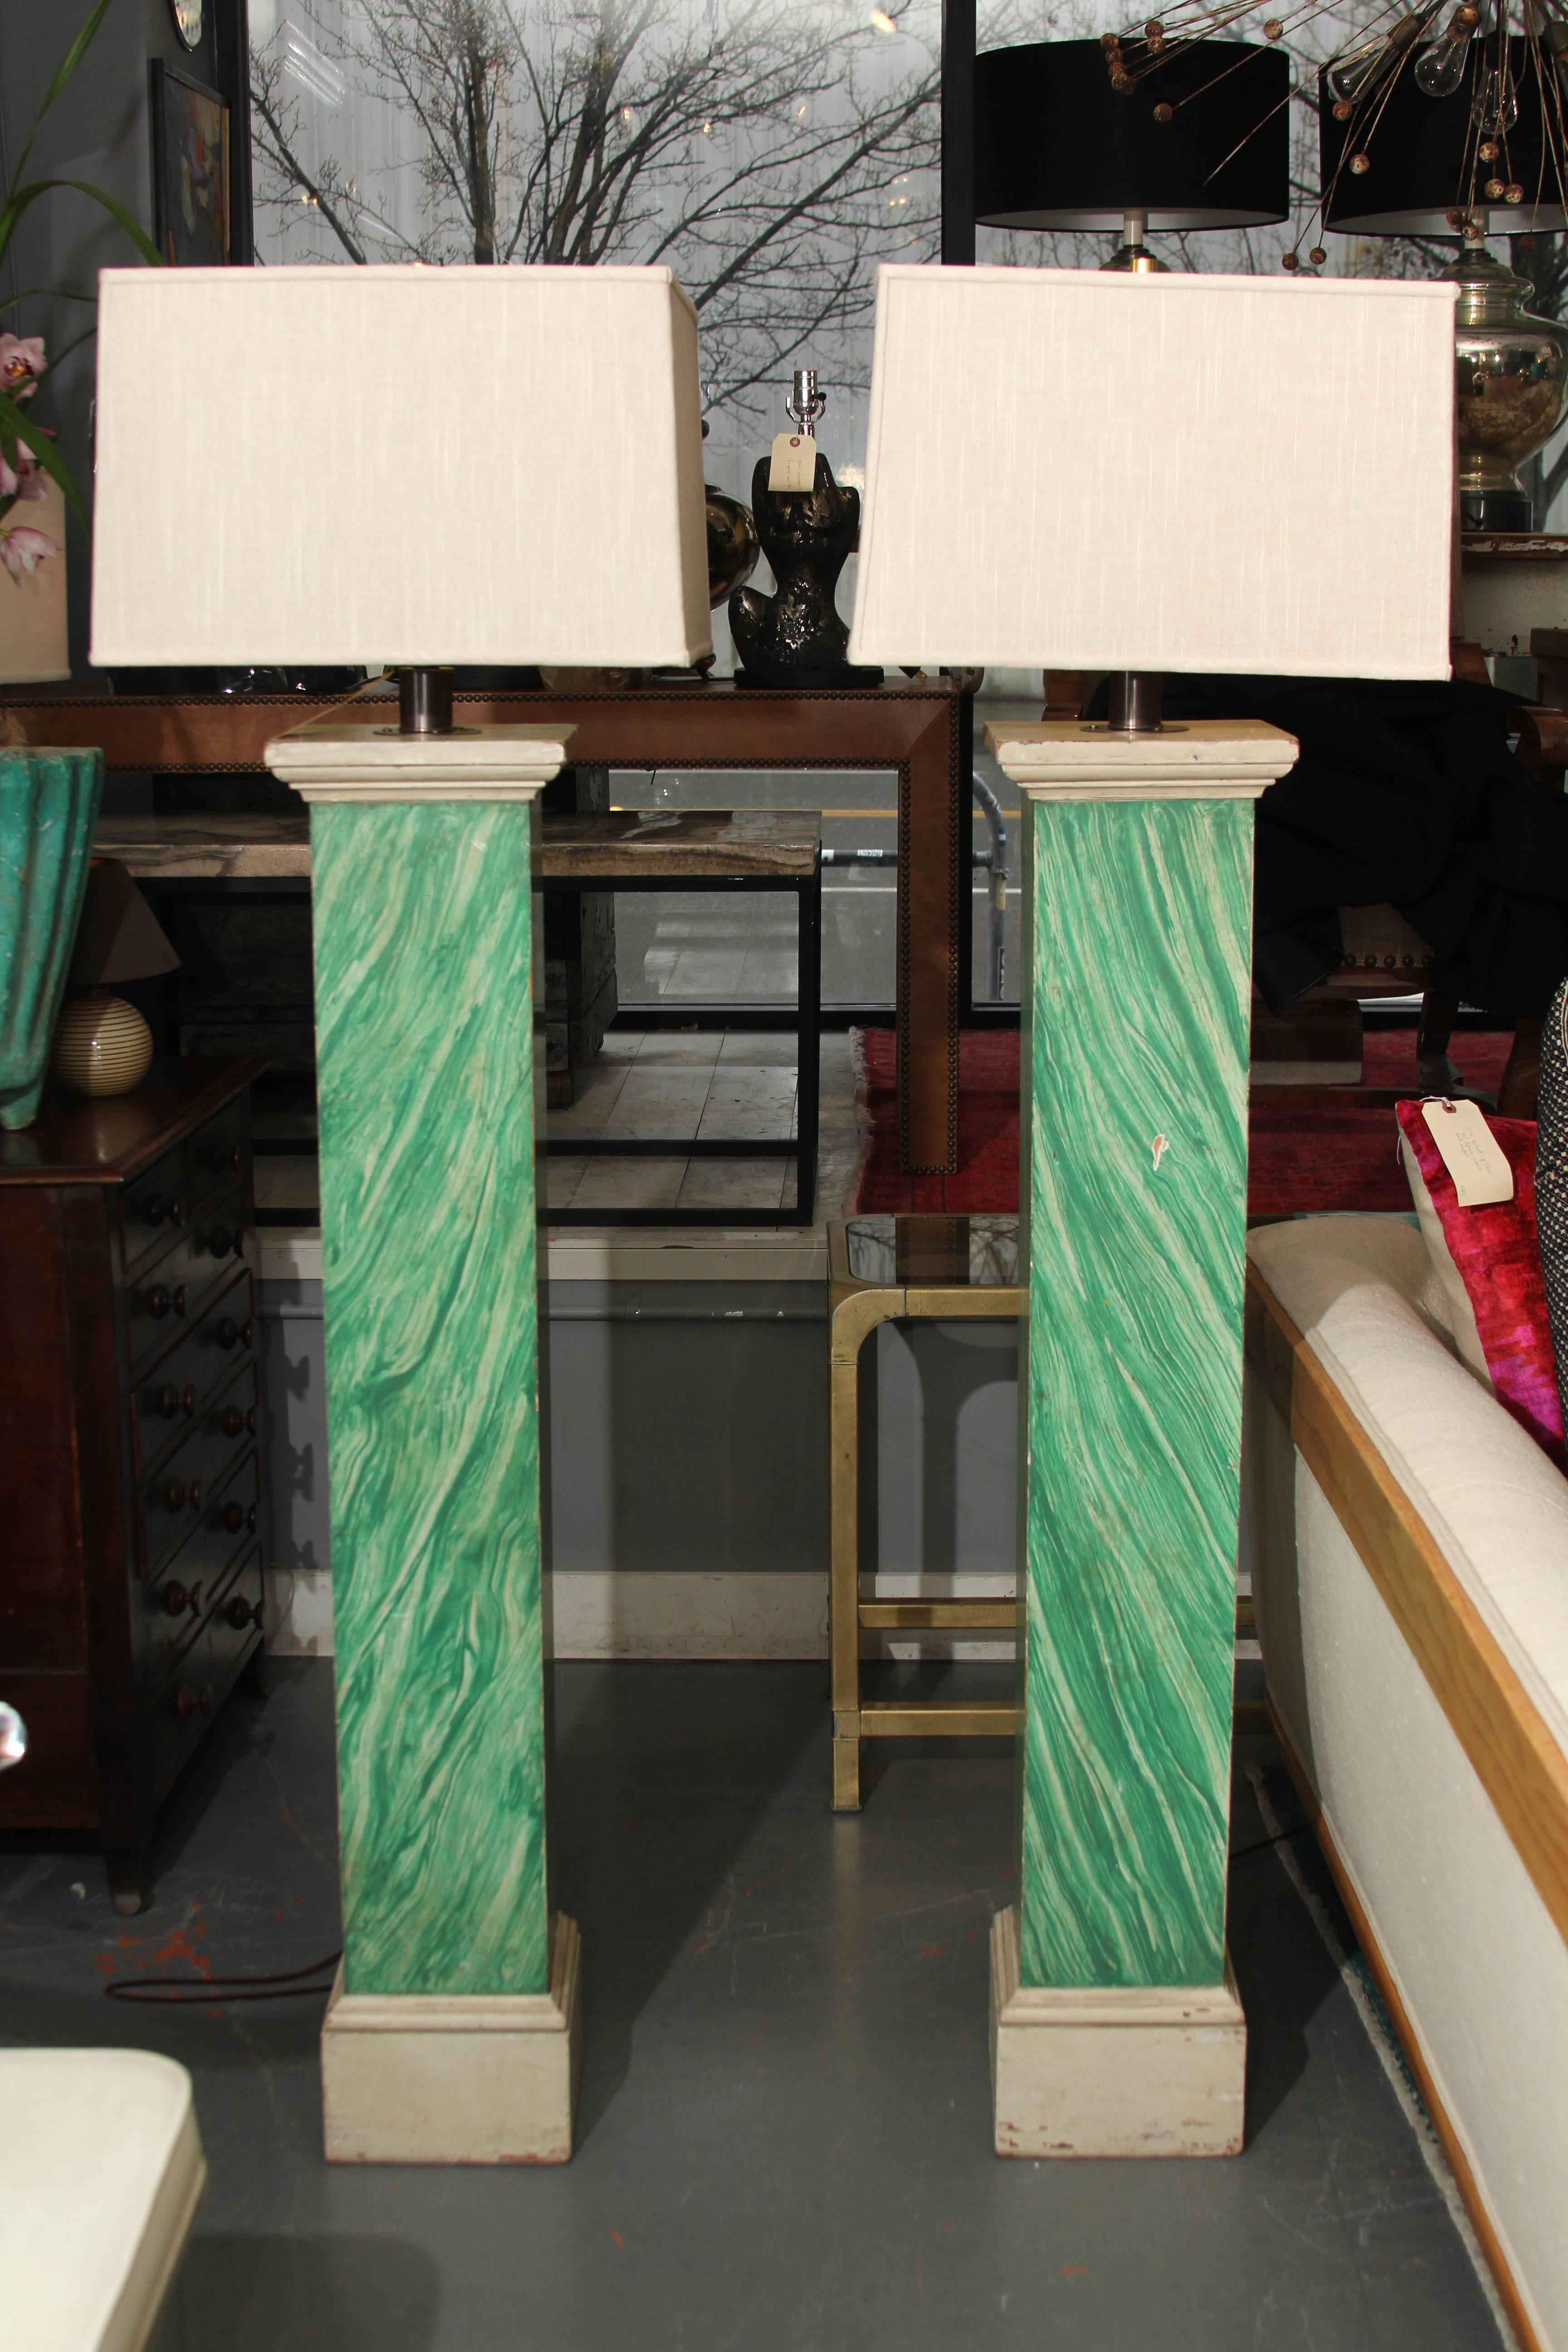 Pair of 1910 wood columns faux painted malachite wired as floor lamps. Measures: Columns are 8 1/2 x 8 1/2 in at base. Linen shades measure 17 1/4 wide at top, 18 at base, 12 in tall. Simple brass finials.